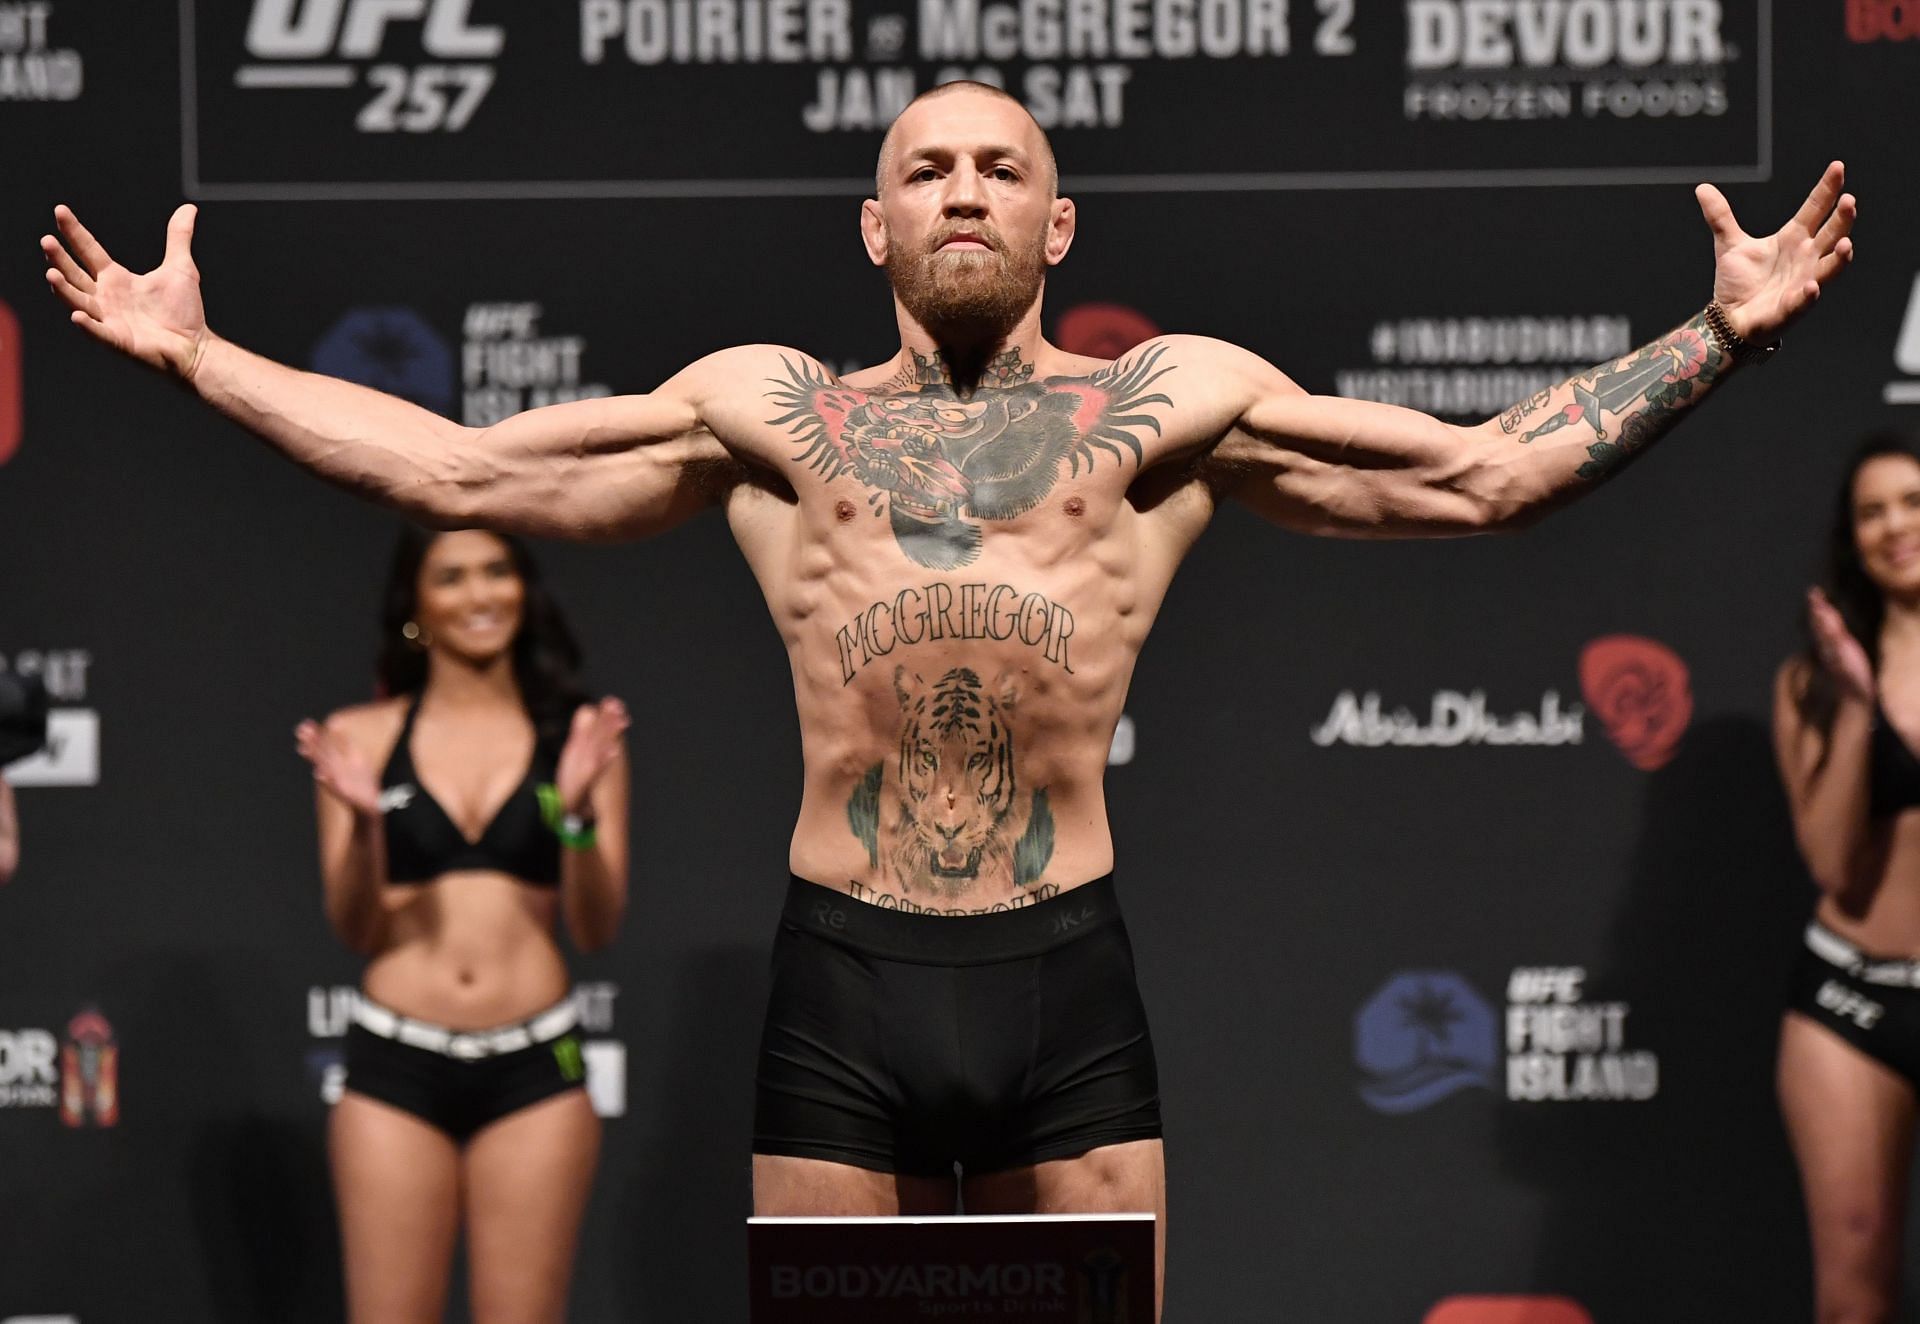 A fight between Conor McGregor and Tony Ferguson would undoubtedly excite UFC fans